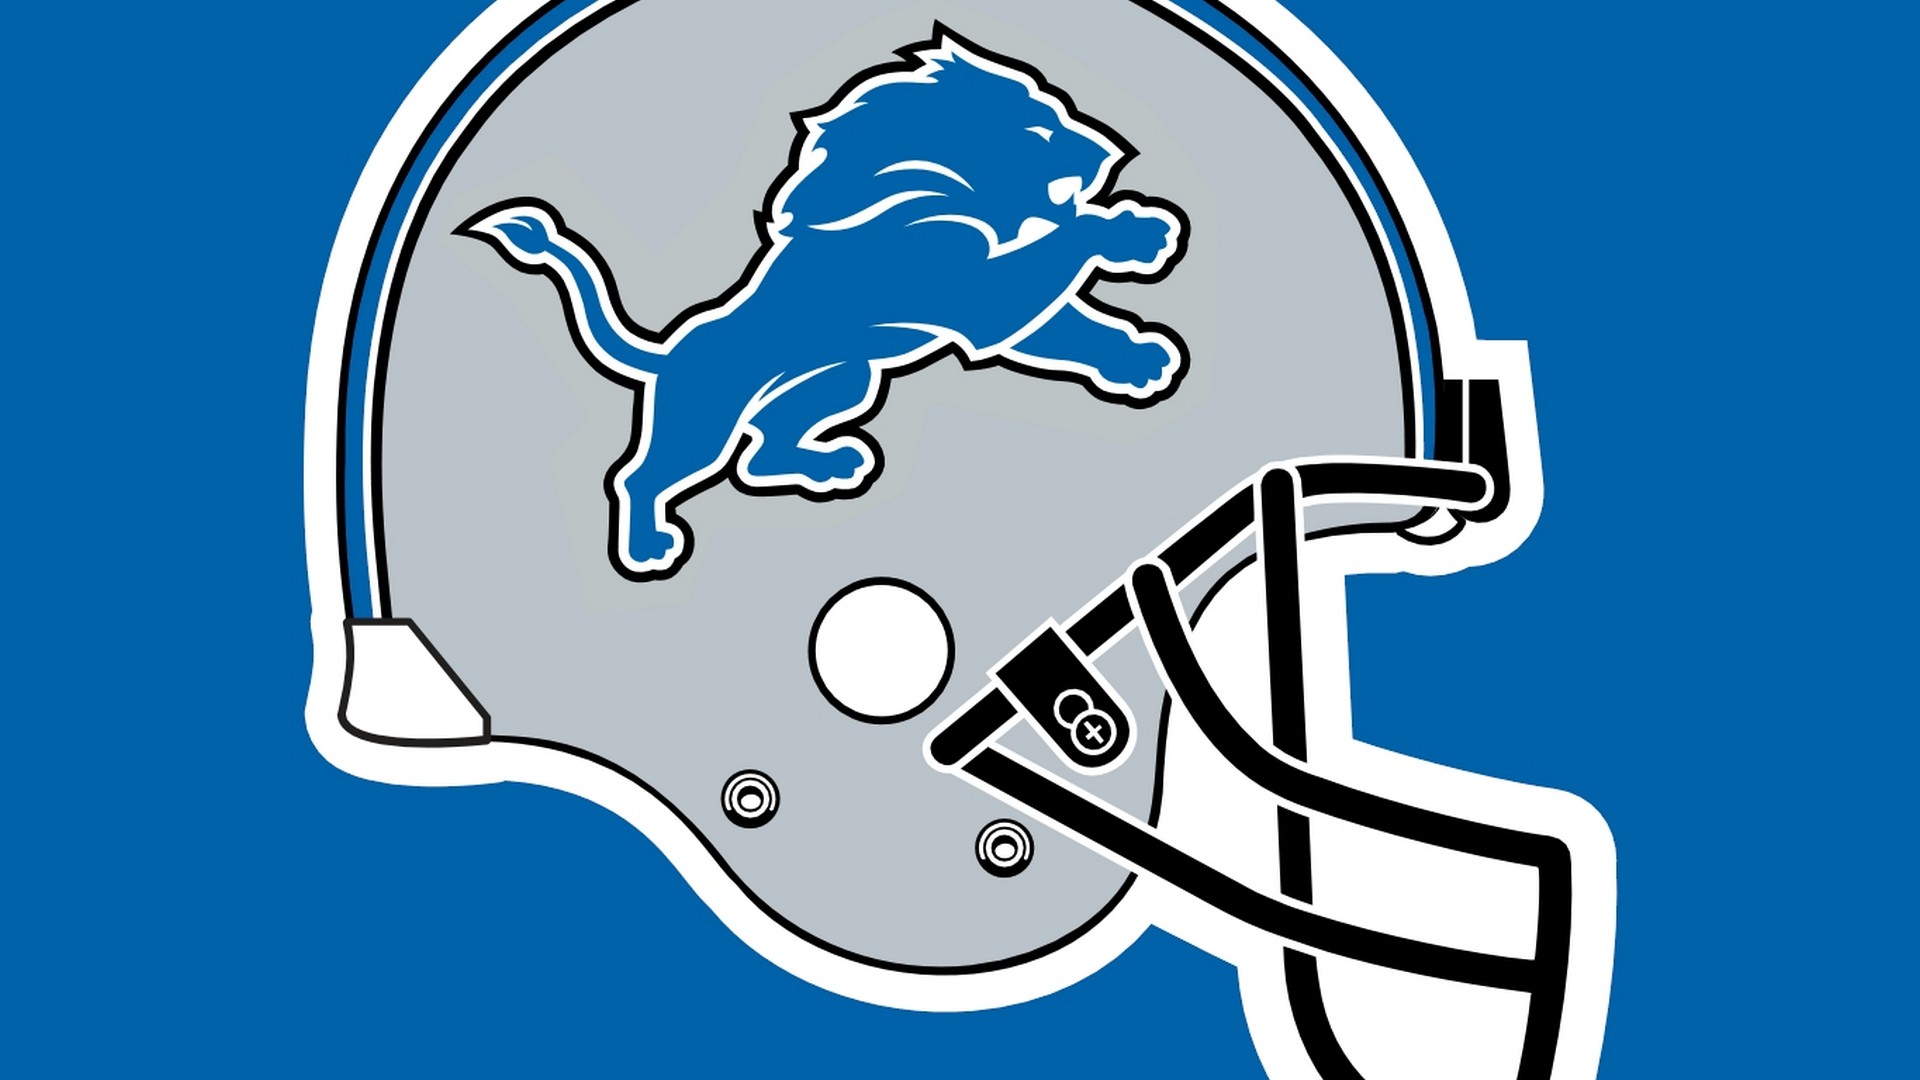 Detroit Lions Mac Wallpaper with high-resolution 1920x1080 pixel. Download and set as wallpaper for Desktop Computer, Apple iPhone X, XS Max, XR, 8, 7, 6, SE, iPad, Android